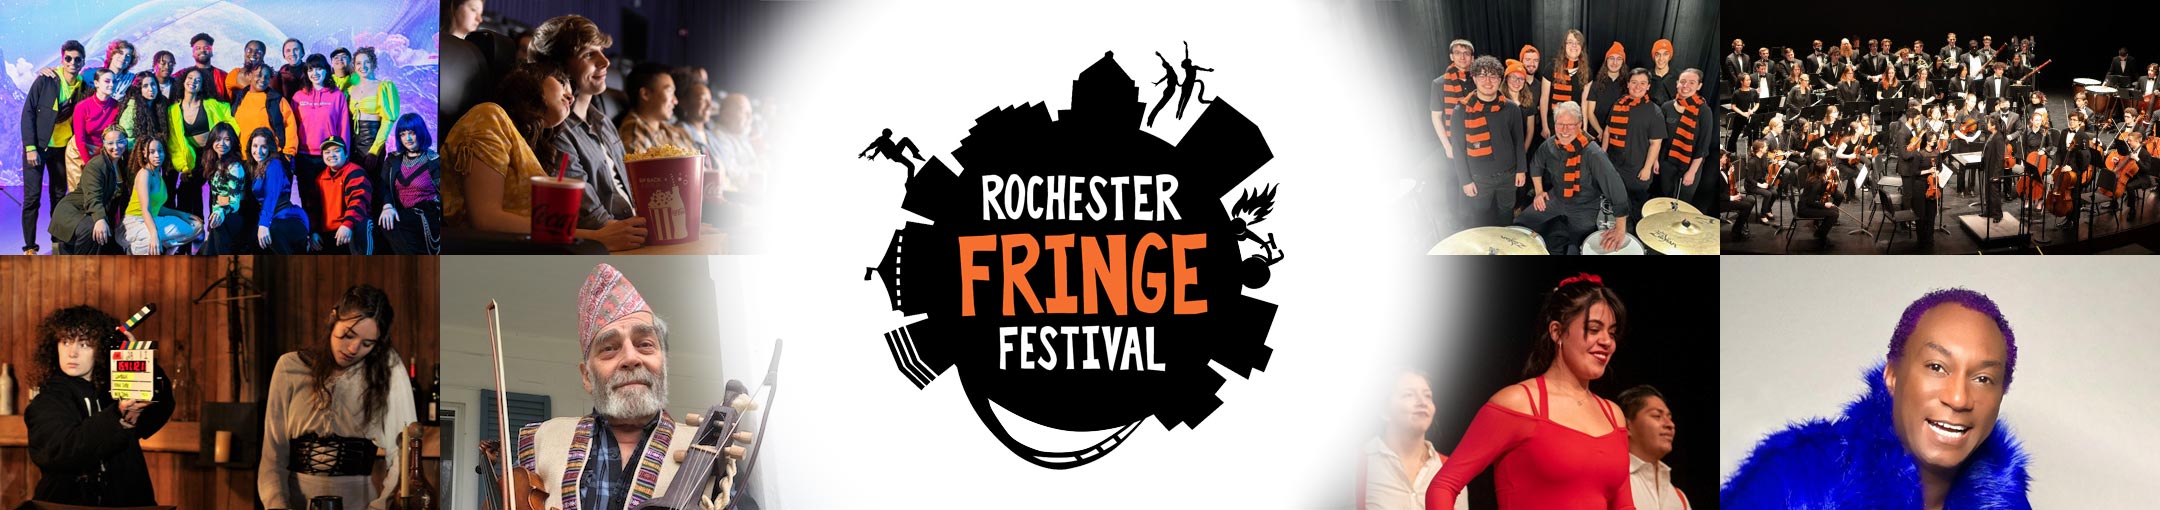 Rochester Fringe Festival logo with several performance photos to the left and right.